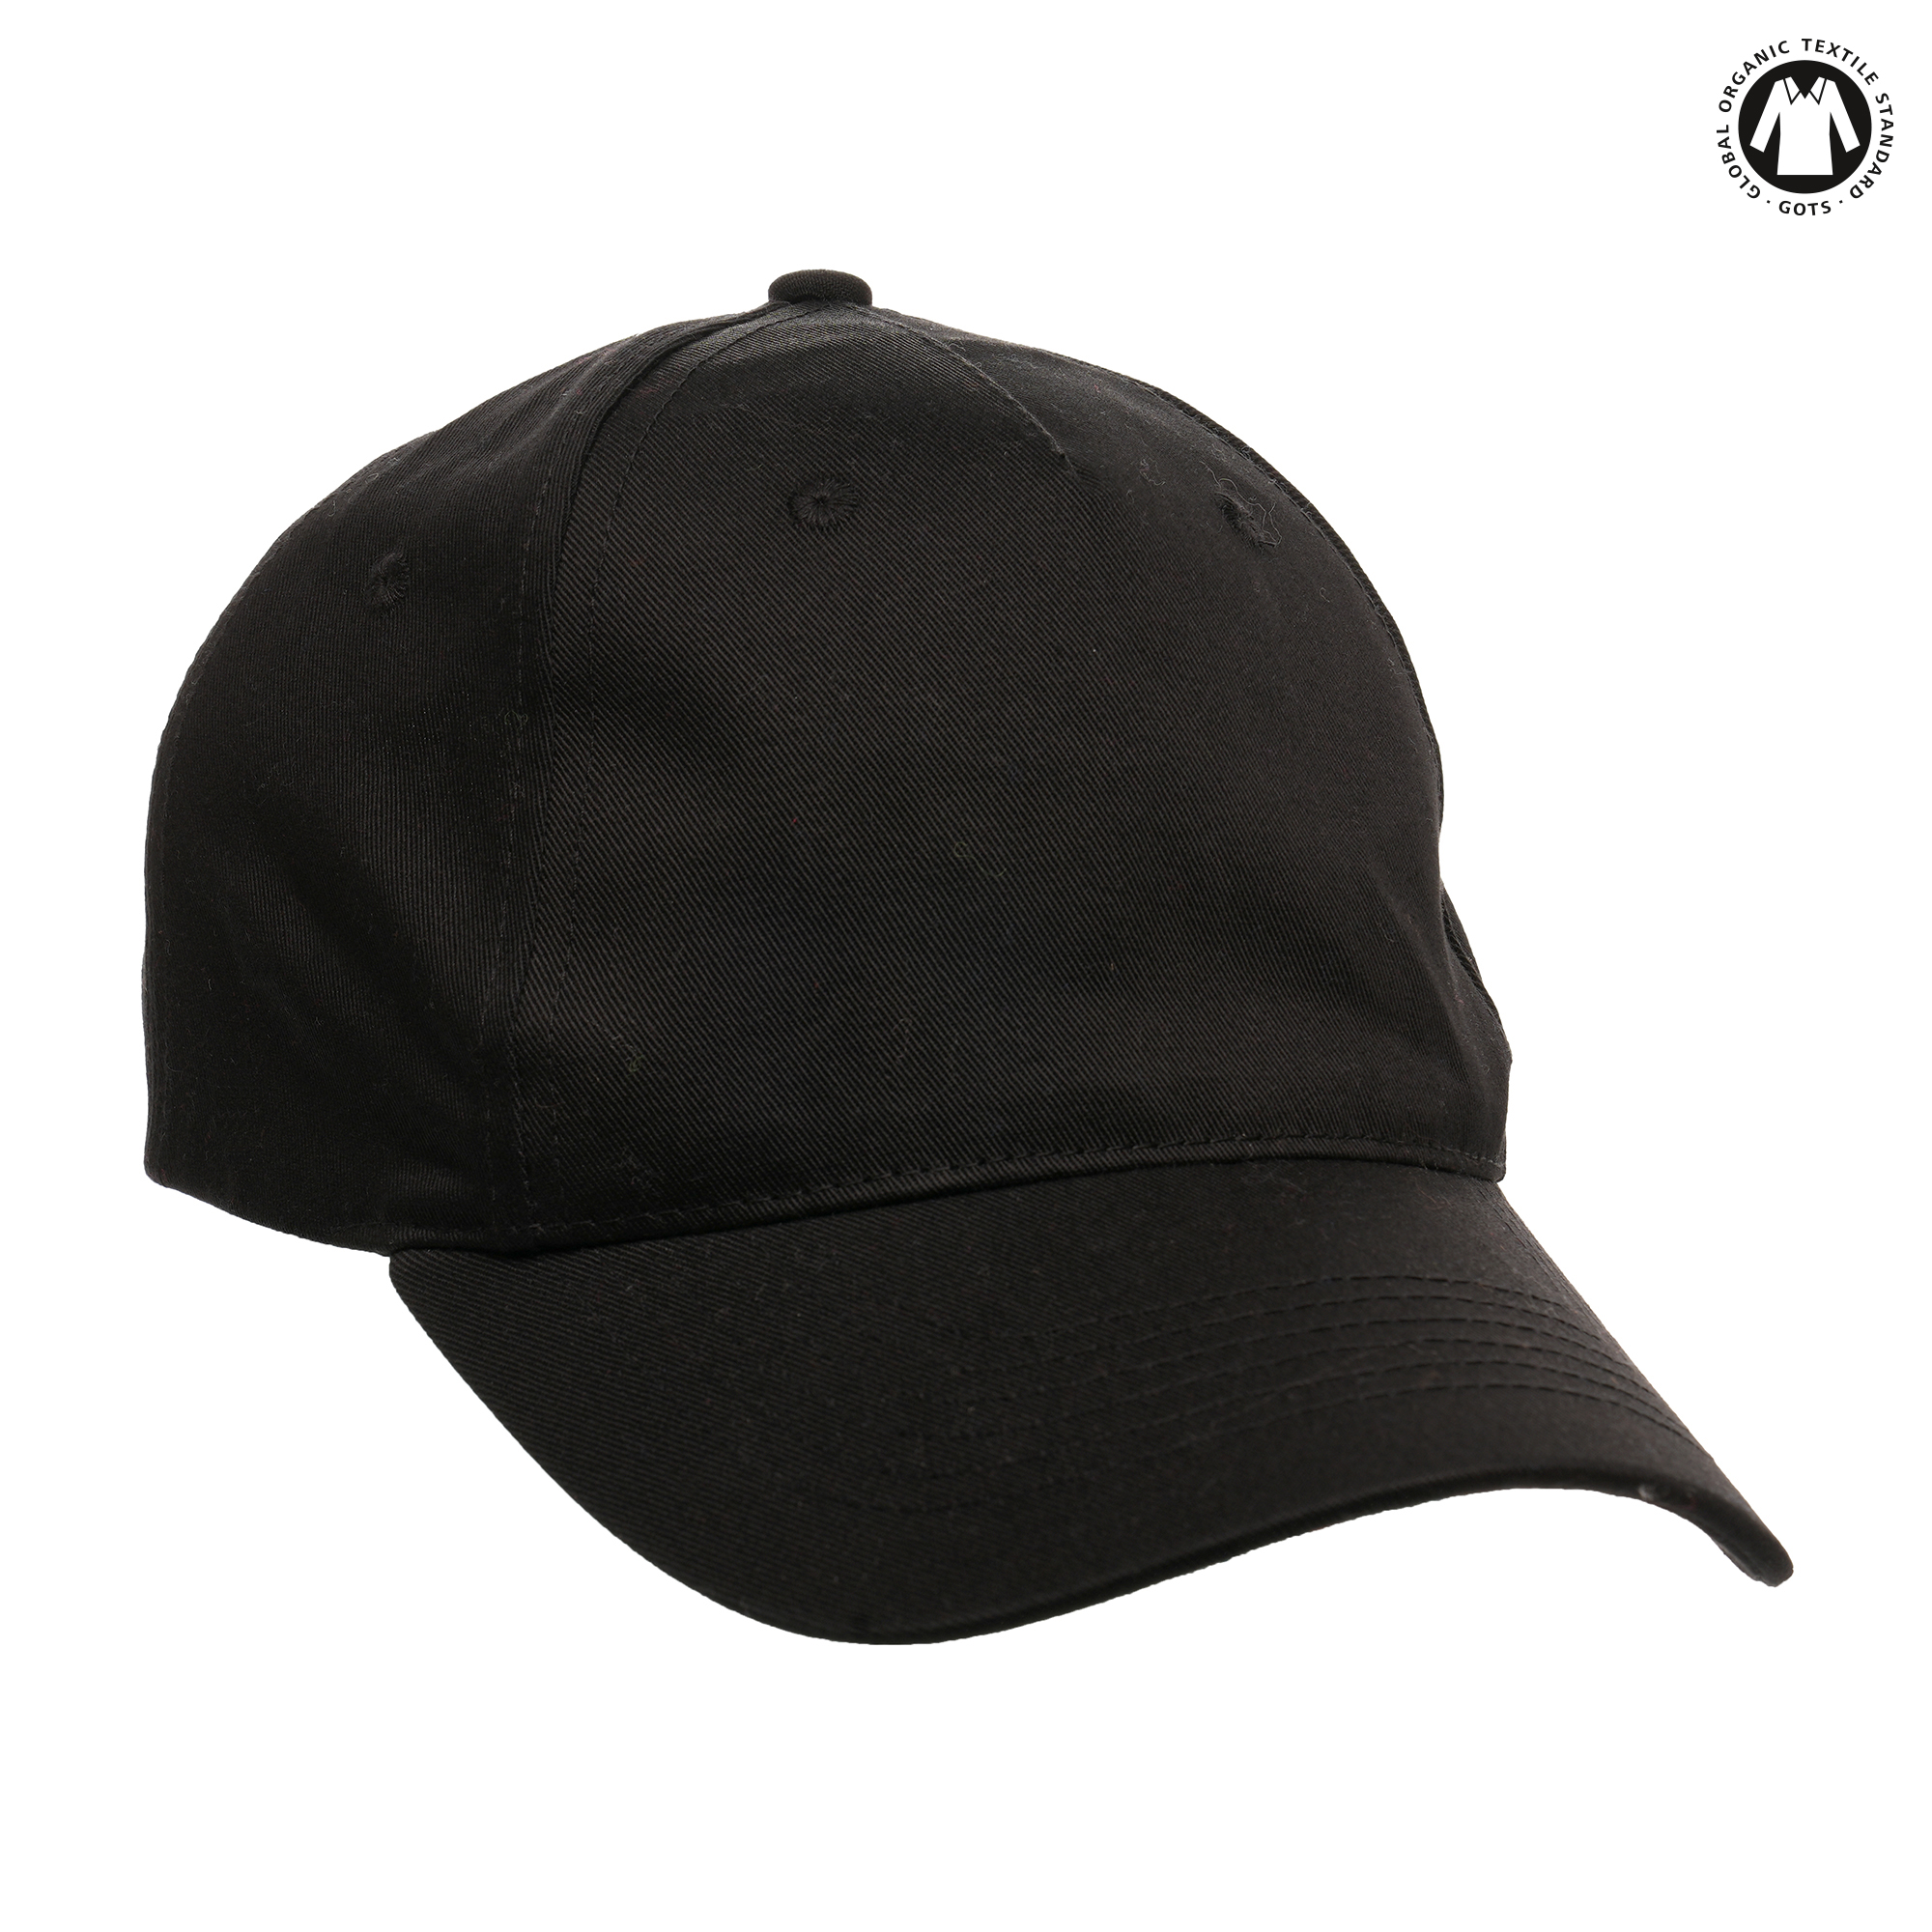 Crafted with care, this adult sized cap is made from 100% organic cotton and provides an eco-alternative to promote your company’s support towards minimising environmental impact. The cap comes with a 5 panel design, pre-curved peak and stitched ventilation eyelets. This organic staple is designed as a sustainable option built for comfort. Available in a variety of colours.